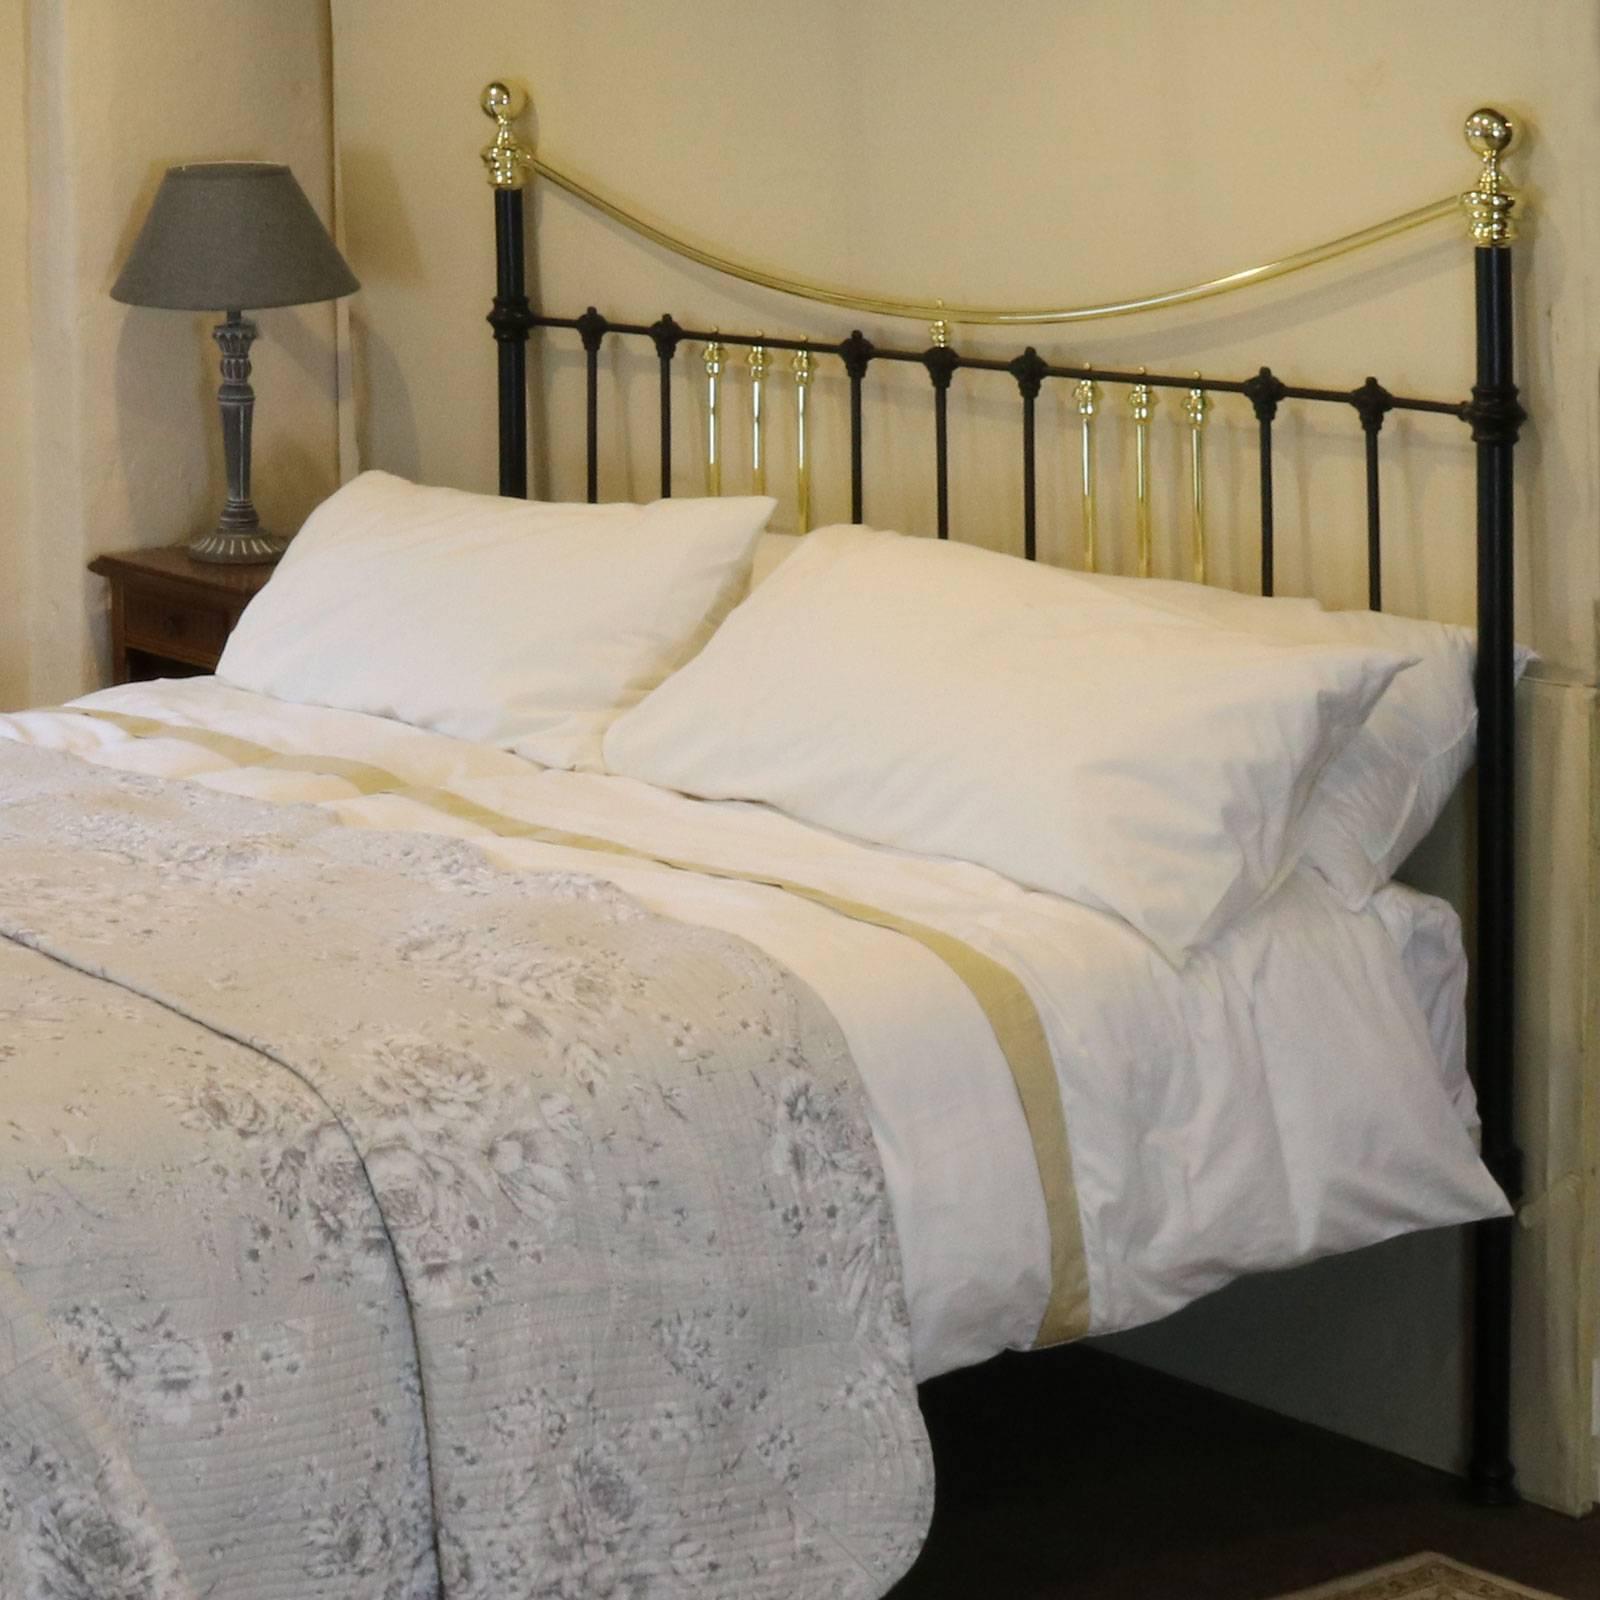 A Victorian bed adapted from an original frame with curved brass top rails and groups of three brass down bars, circa 1890.

This bed accepts a British Super King or Californian King (72 in or 180 cm wide) base and mattress set.

The price is